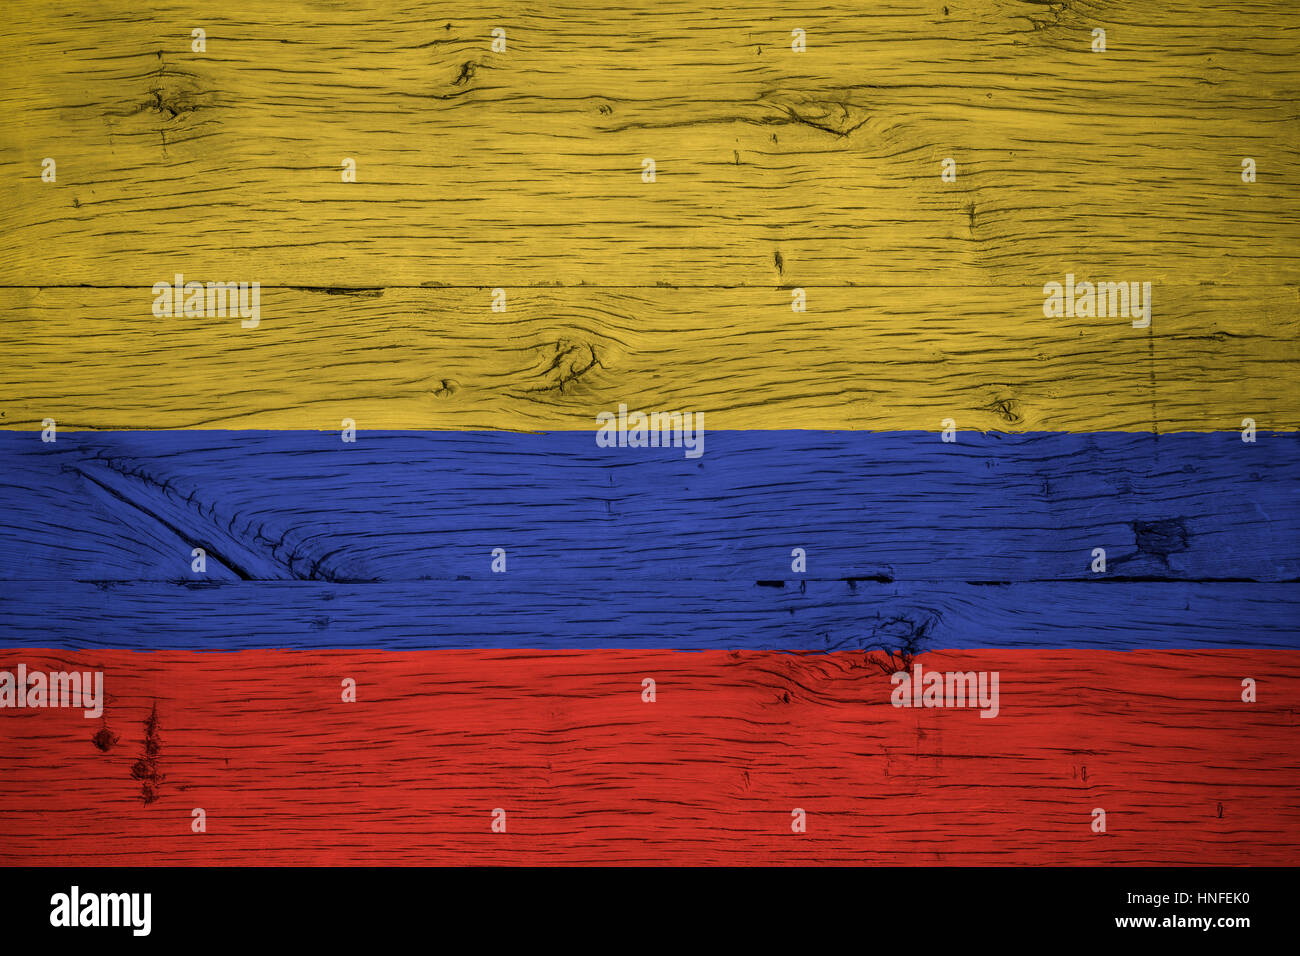 Colombia national flag painted on old oak wood. Painting is colorful on planks of old train carriage. Stock Photo